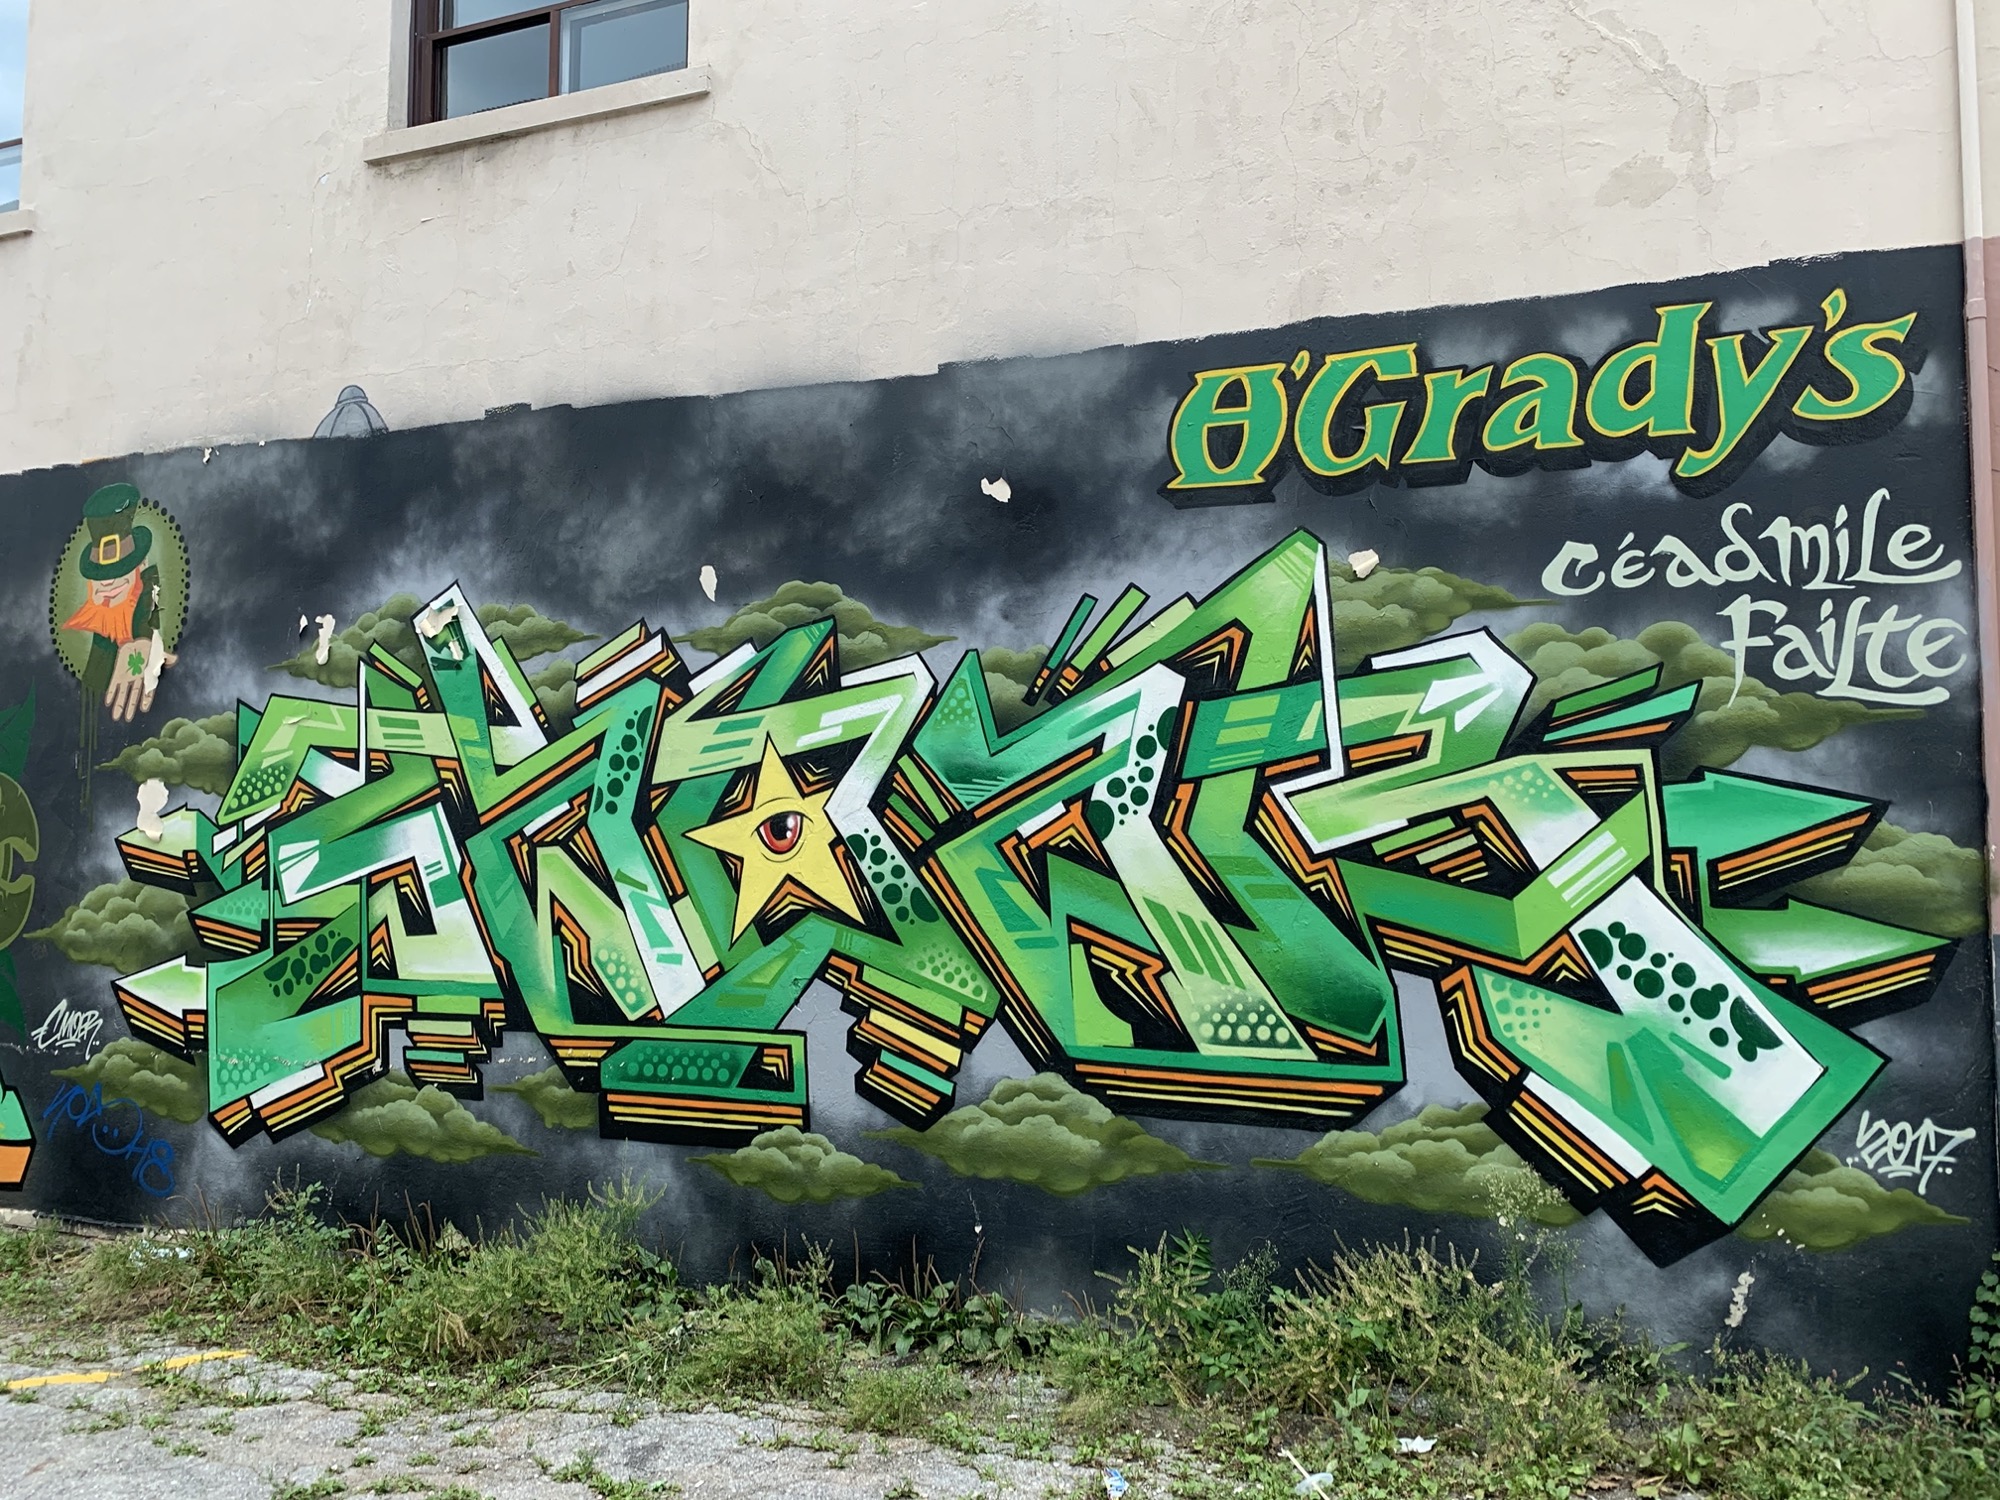 Graffiti 2464  captured by Rabot in Toronto Canada